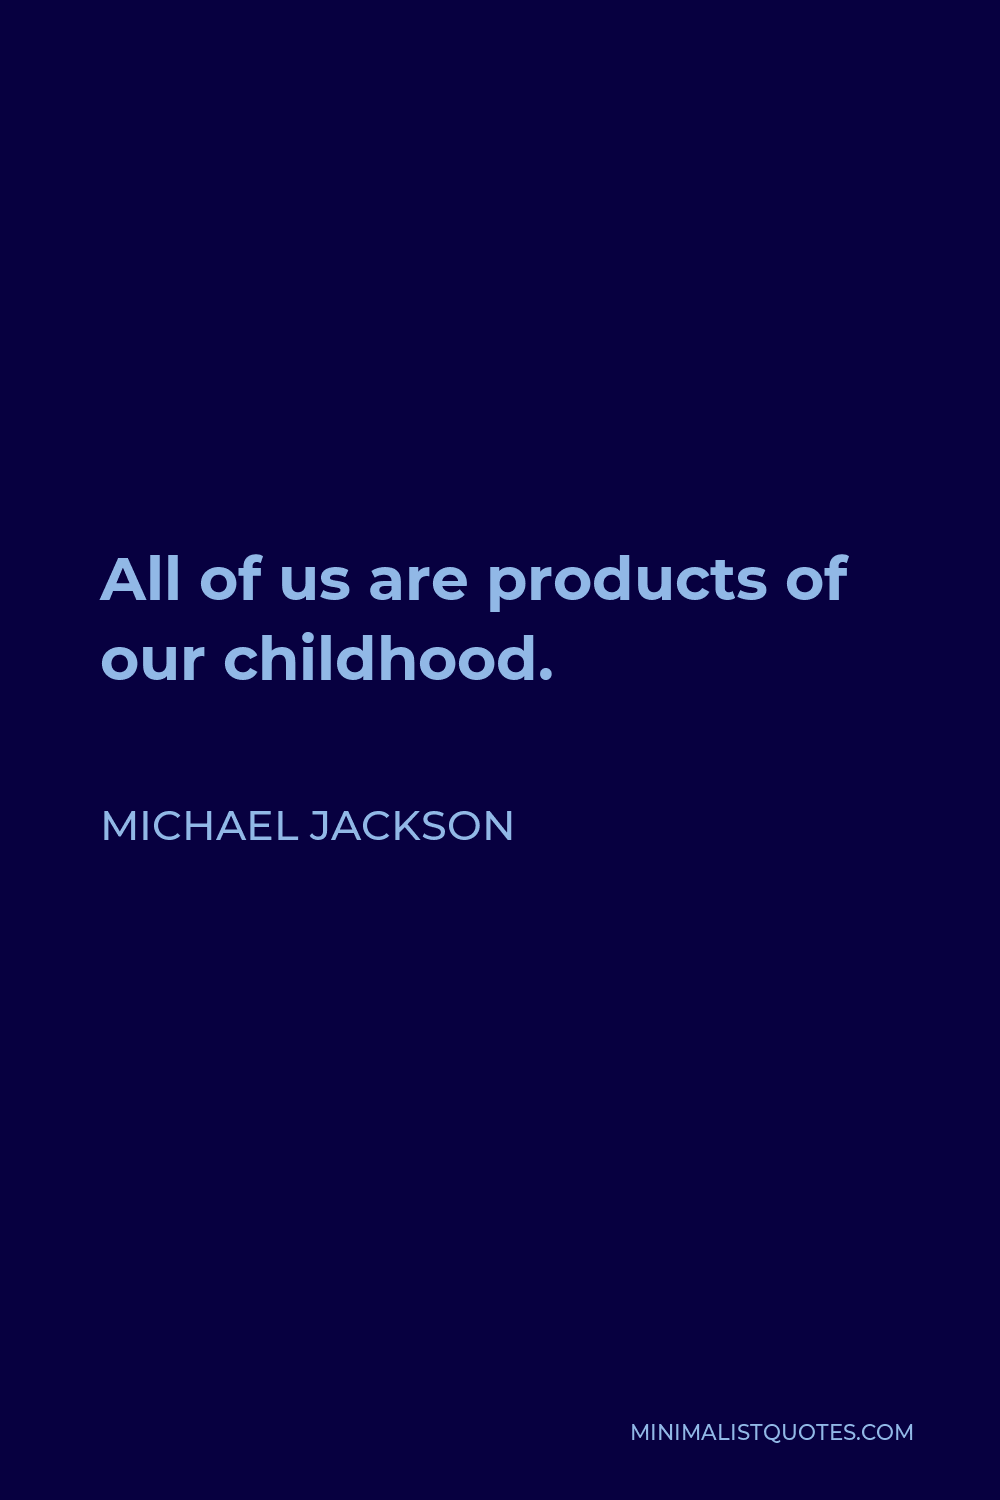 Michael Jackson Quote - All of us are products of our childhood.